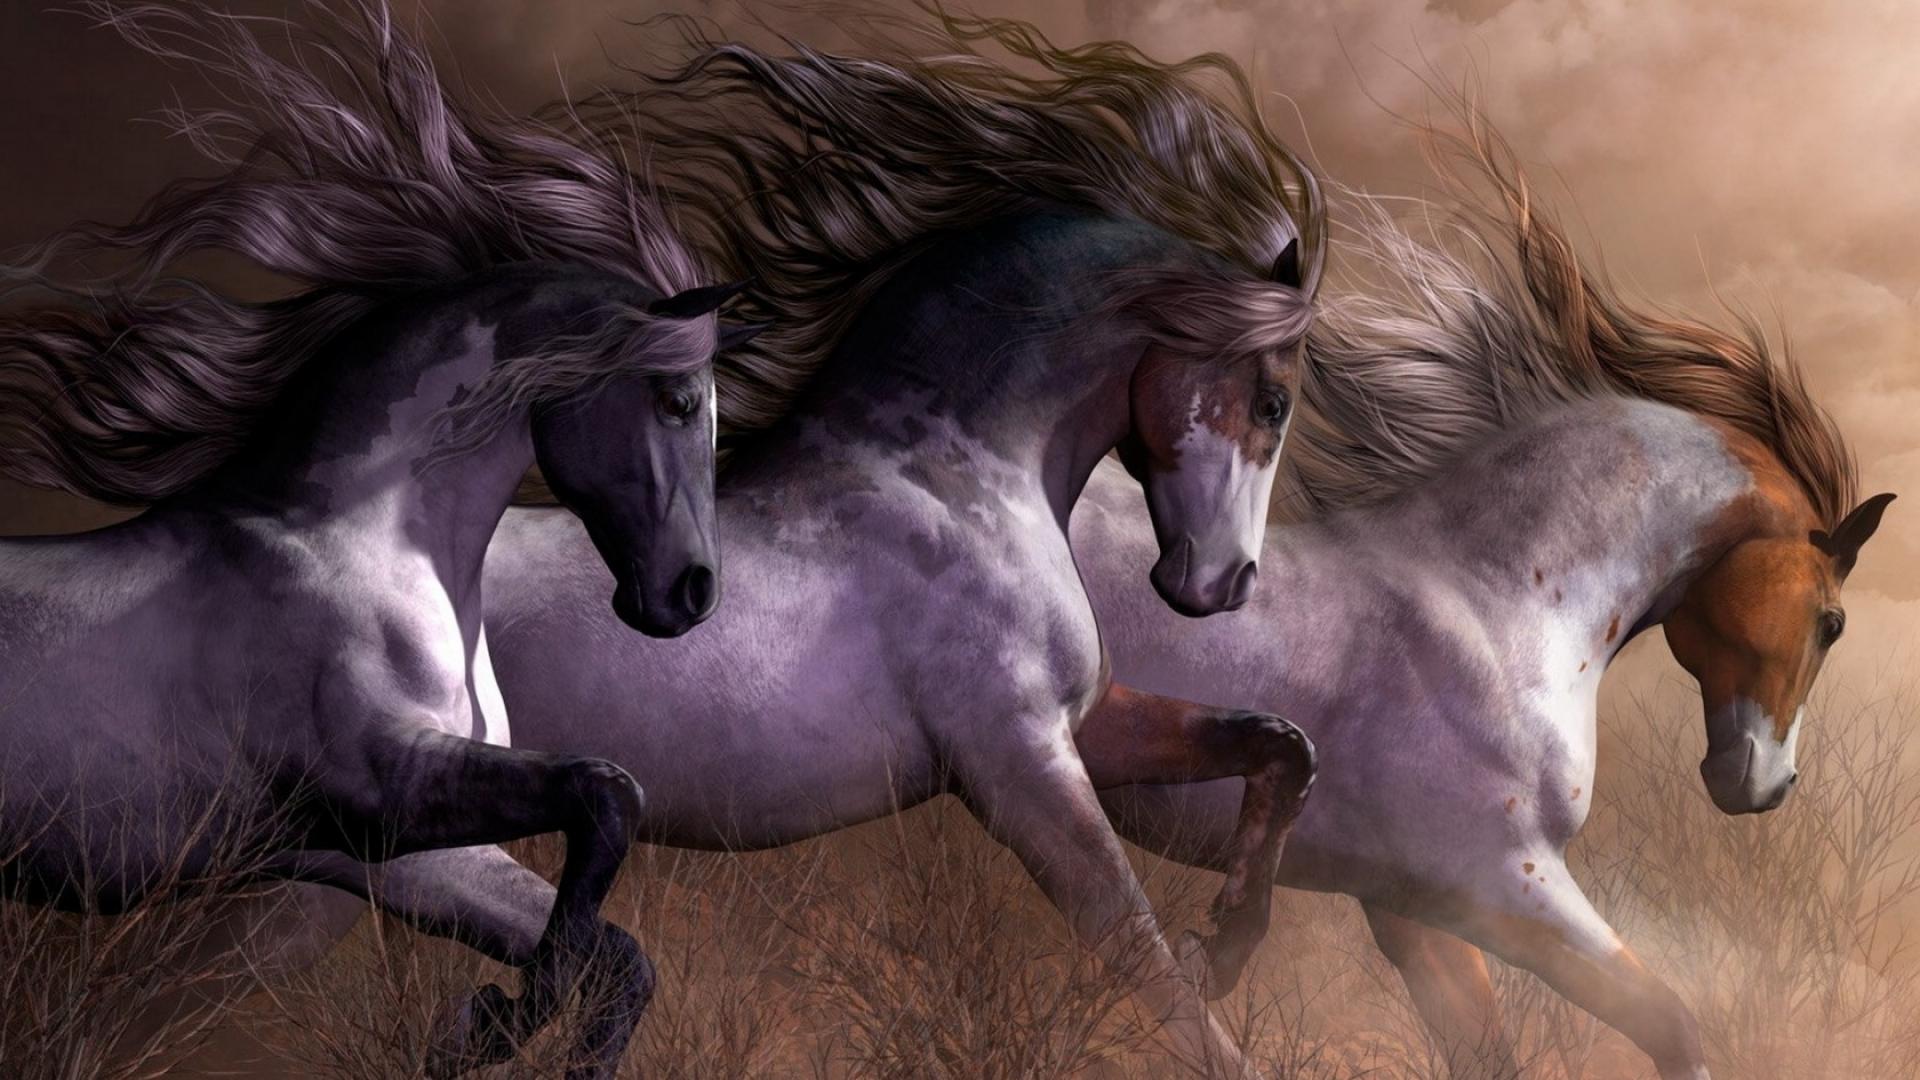 Horse Painting Wallpaper Pictures Image